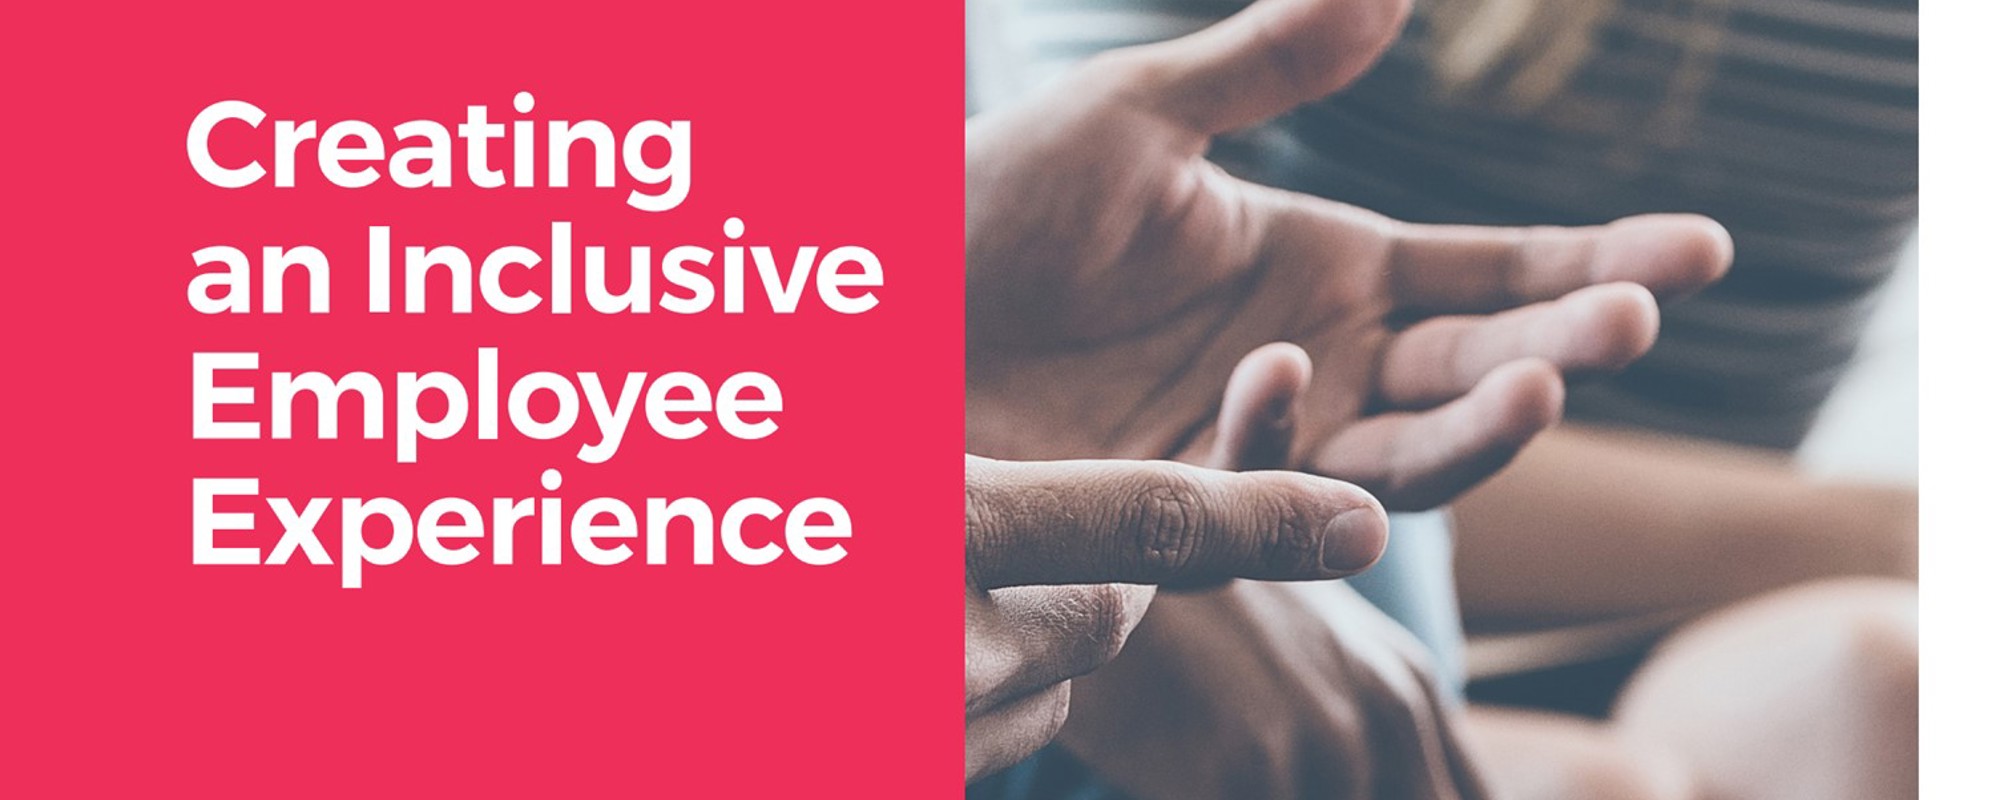 Creating an Inclusive Employee Experience